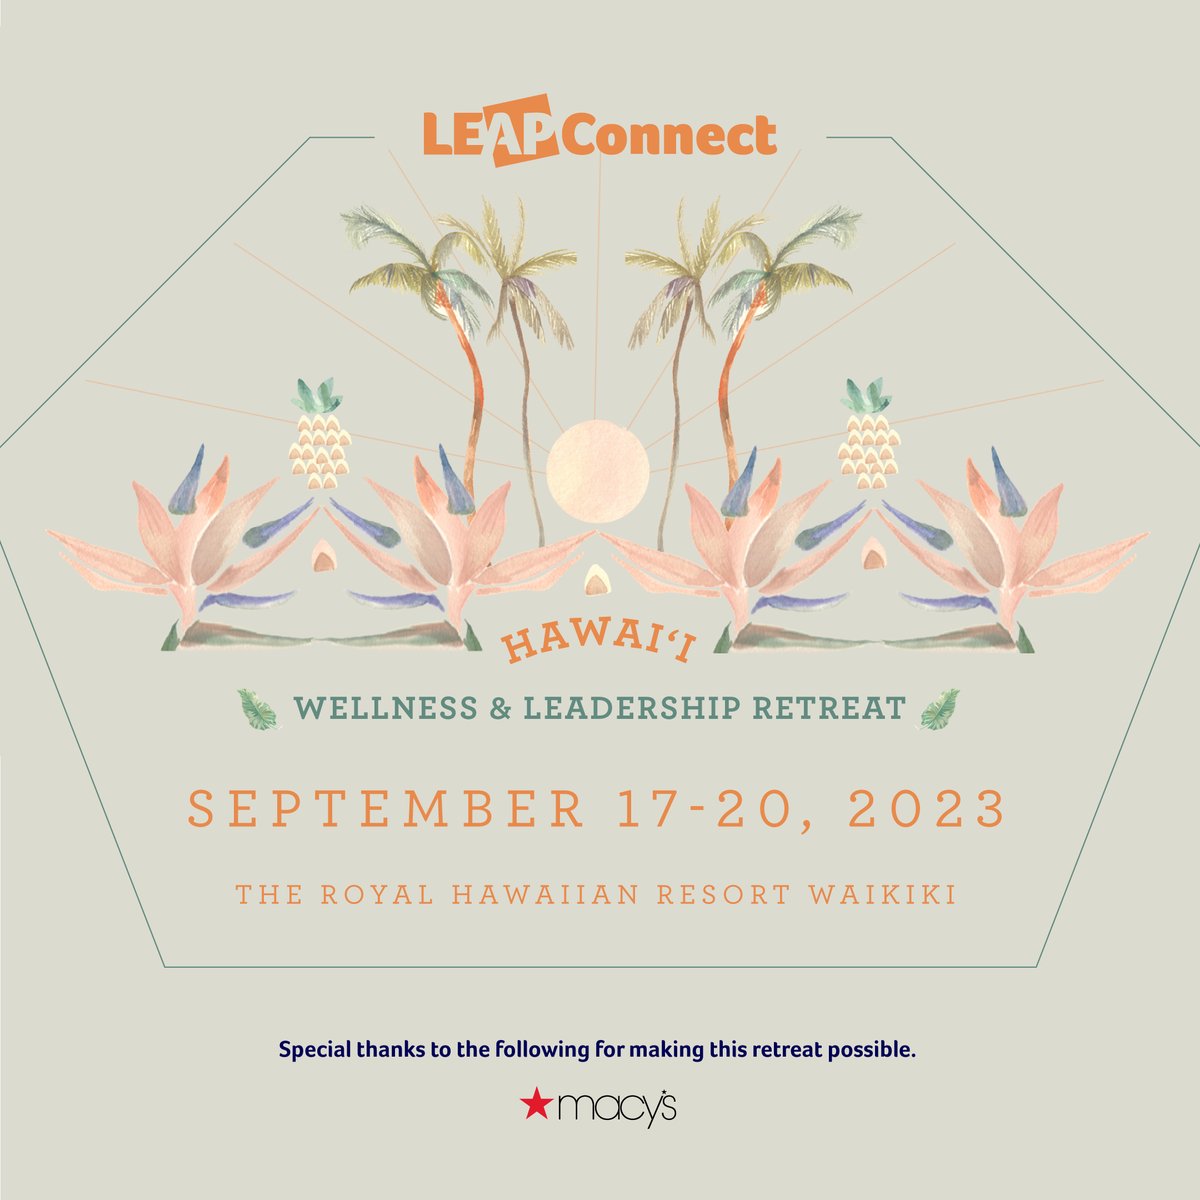 We invite all API (Asian, Native Hawaiian and Pacific Islander) women who want to grow and heal from traumas related to racially motivated injustices. Registration fee includes your stay, food, and activities. More info here leap.org/retreat2023